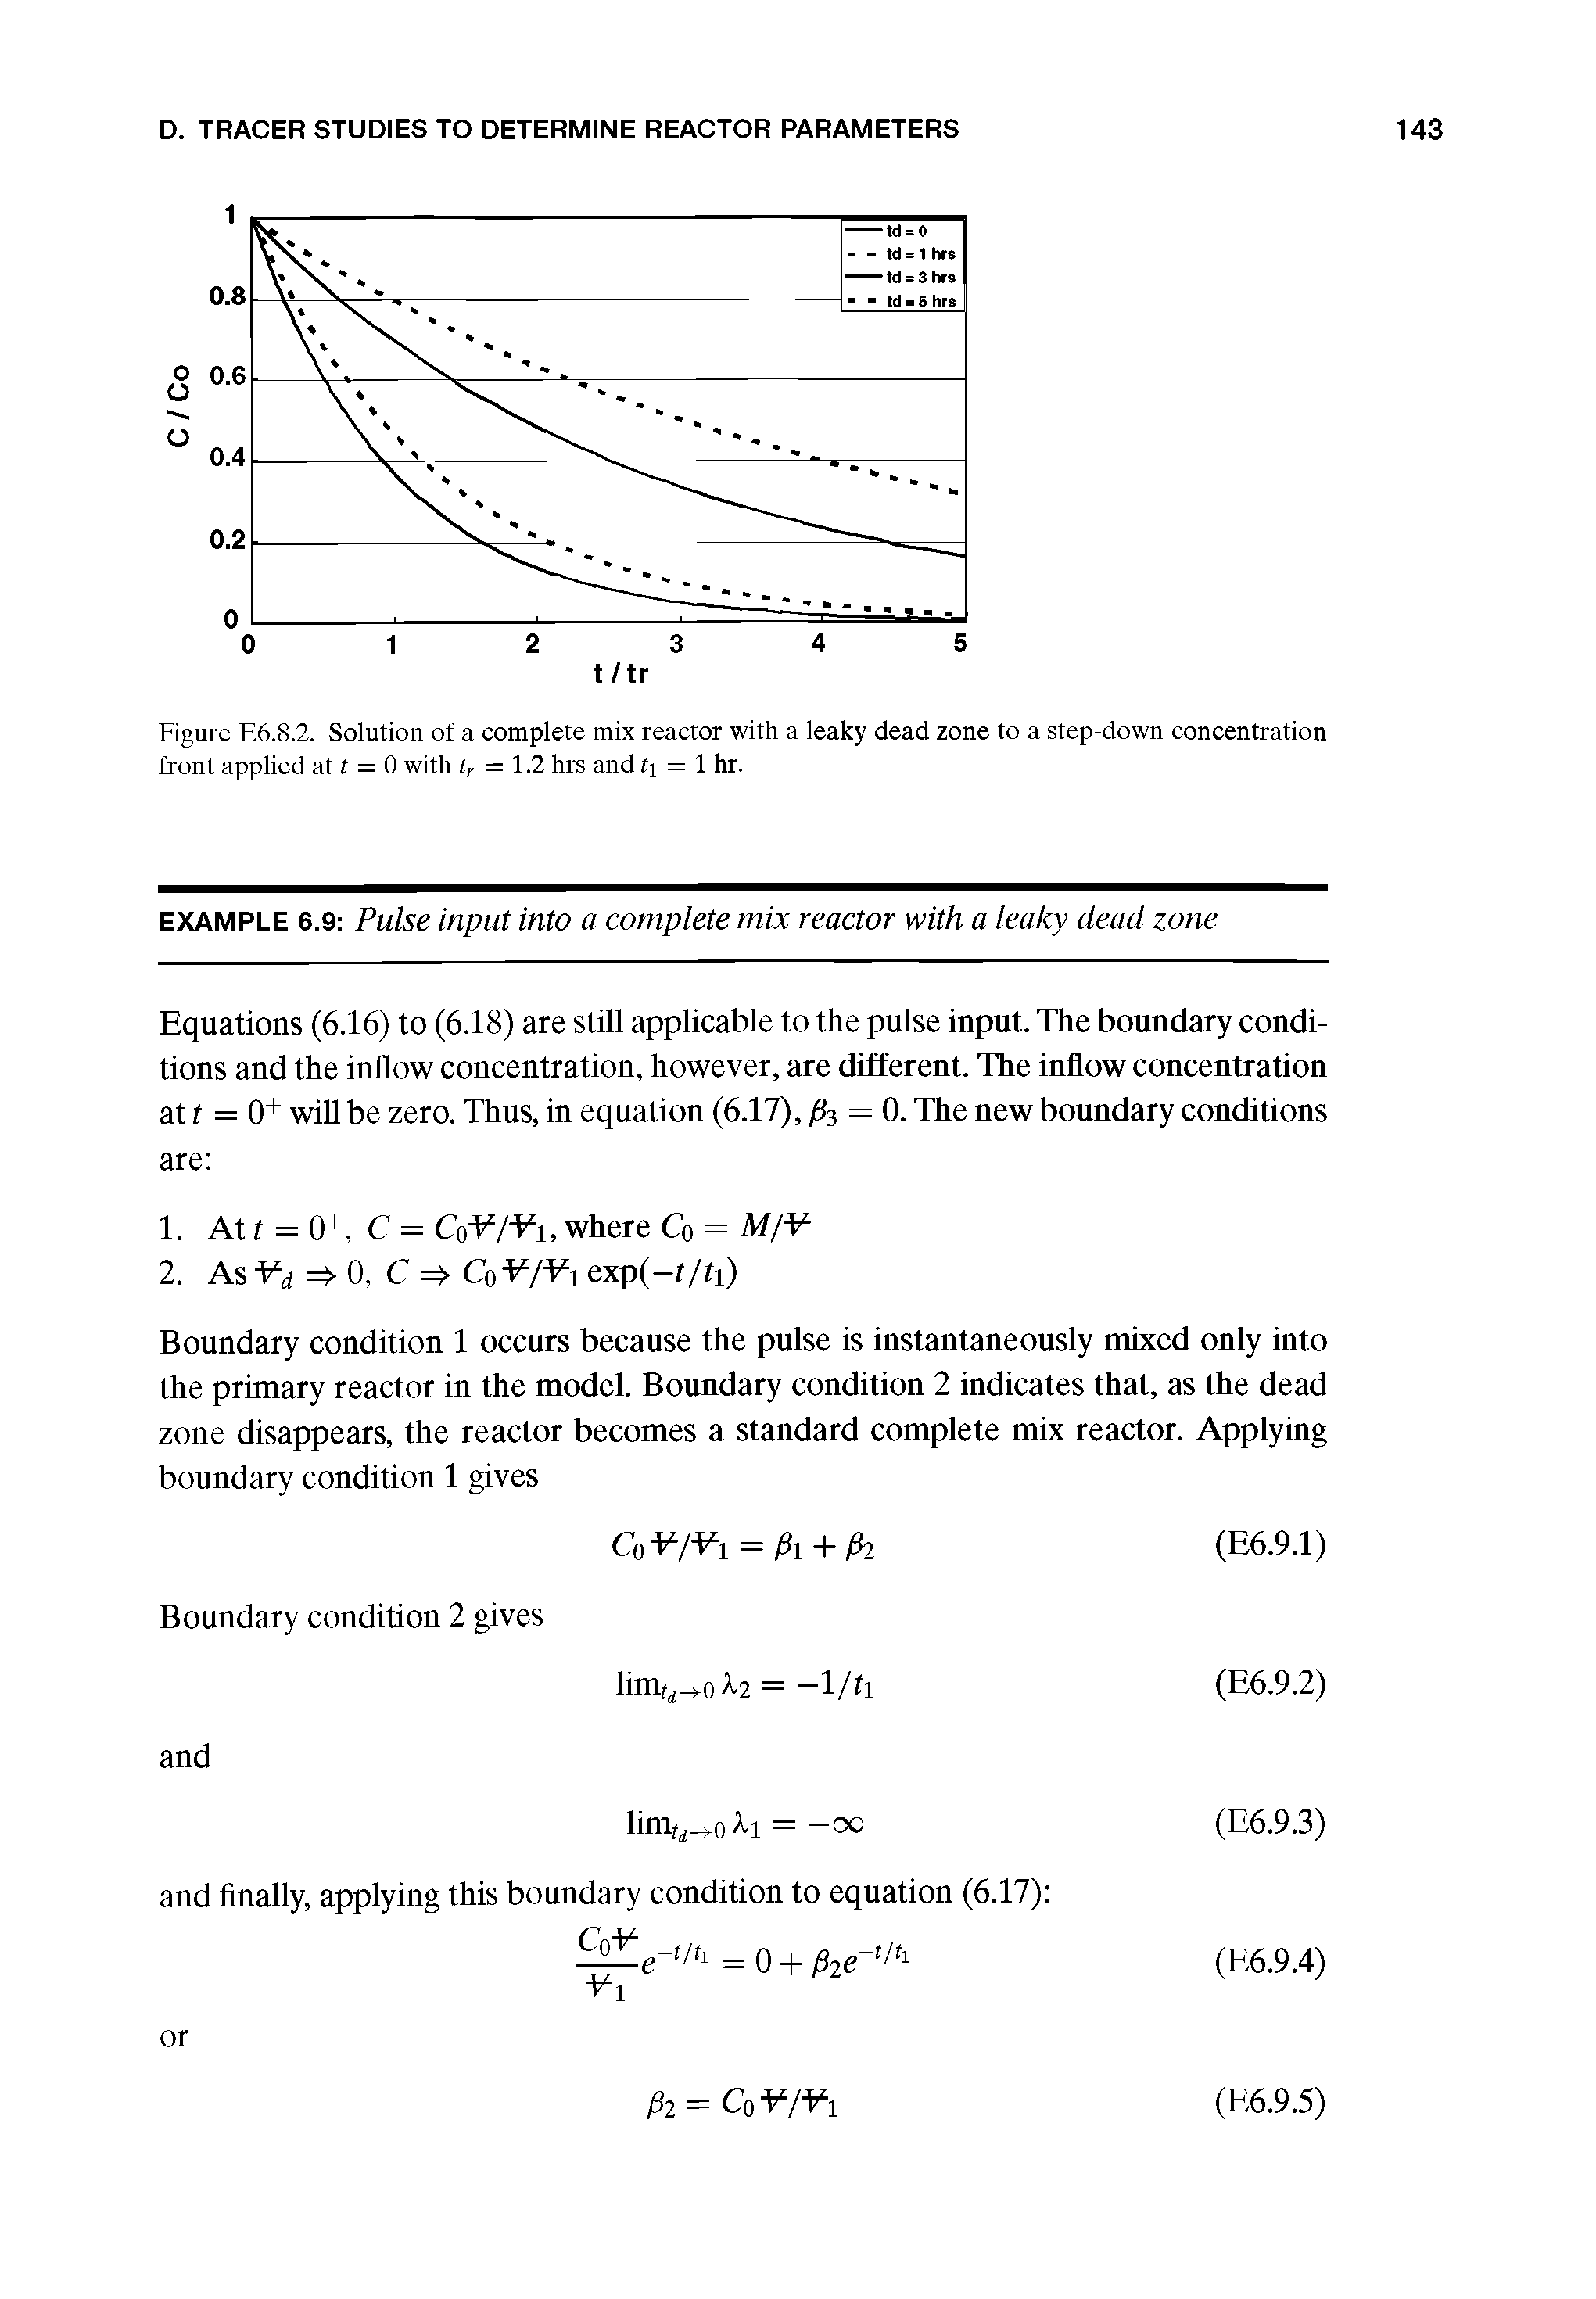 Figure E6.8.2. Solution of a complete mix reactor with a leaky dead zone to a step-down concentration front applied at f = 0 with ty = 1.2 hrs and h = 1 hr.